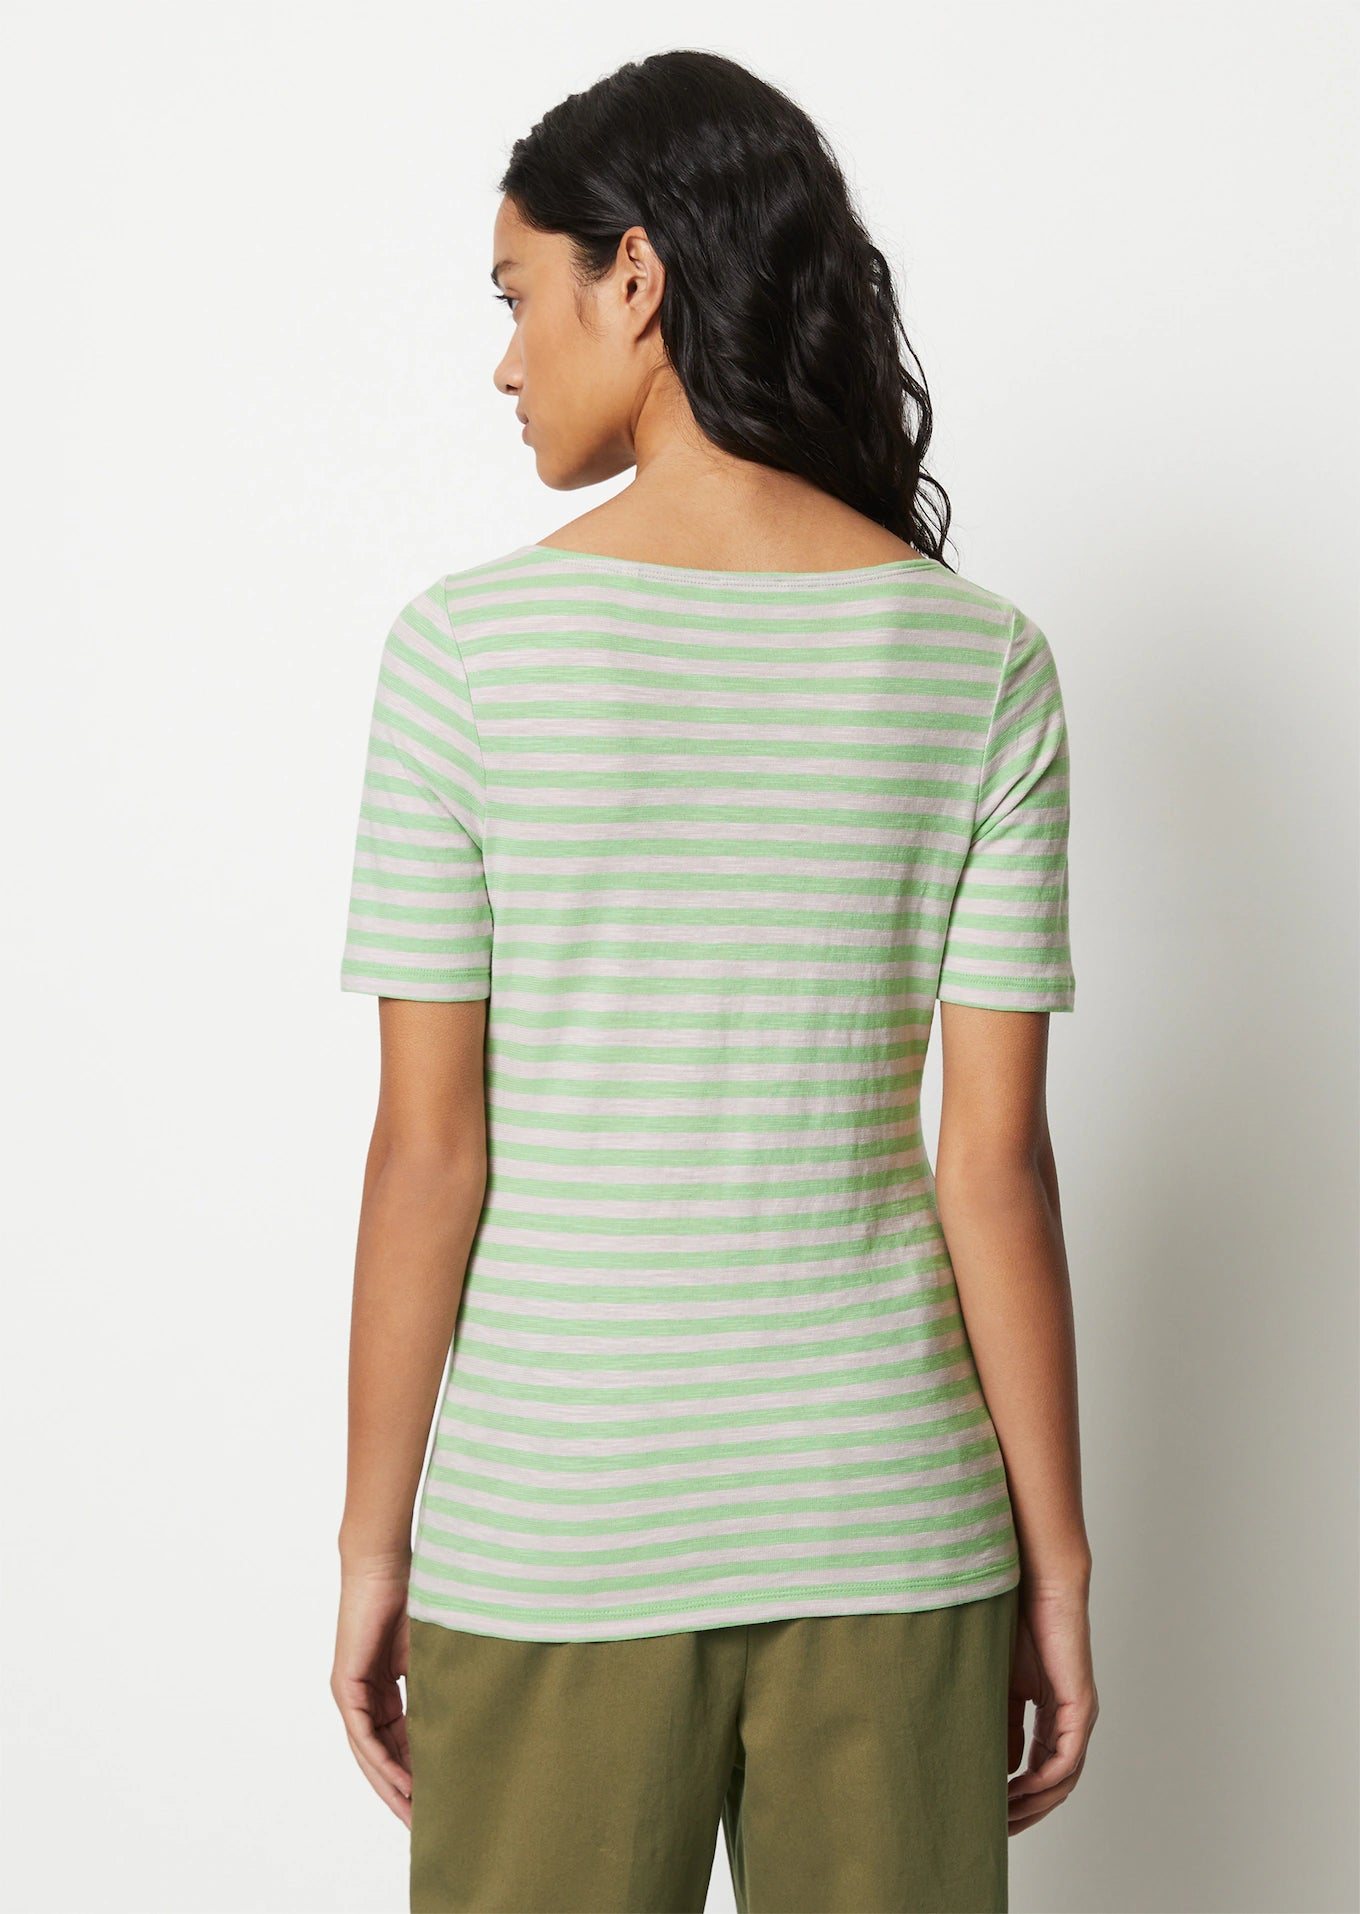 Boat Neck T-Shirt in Pure Mint